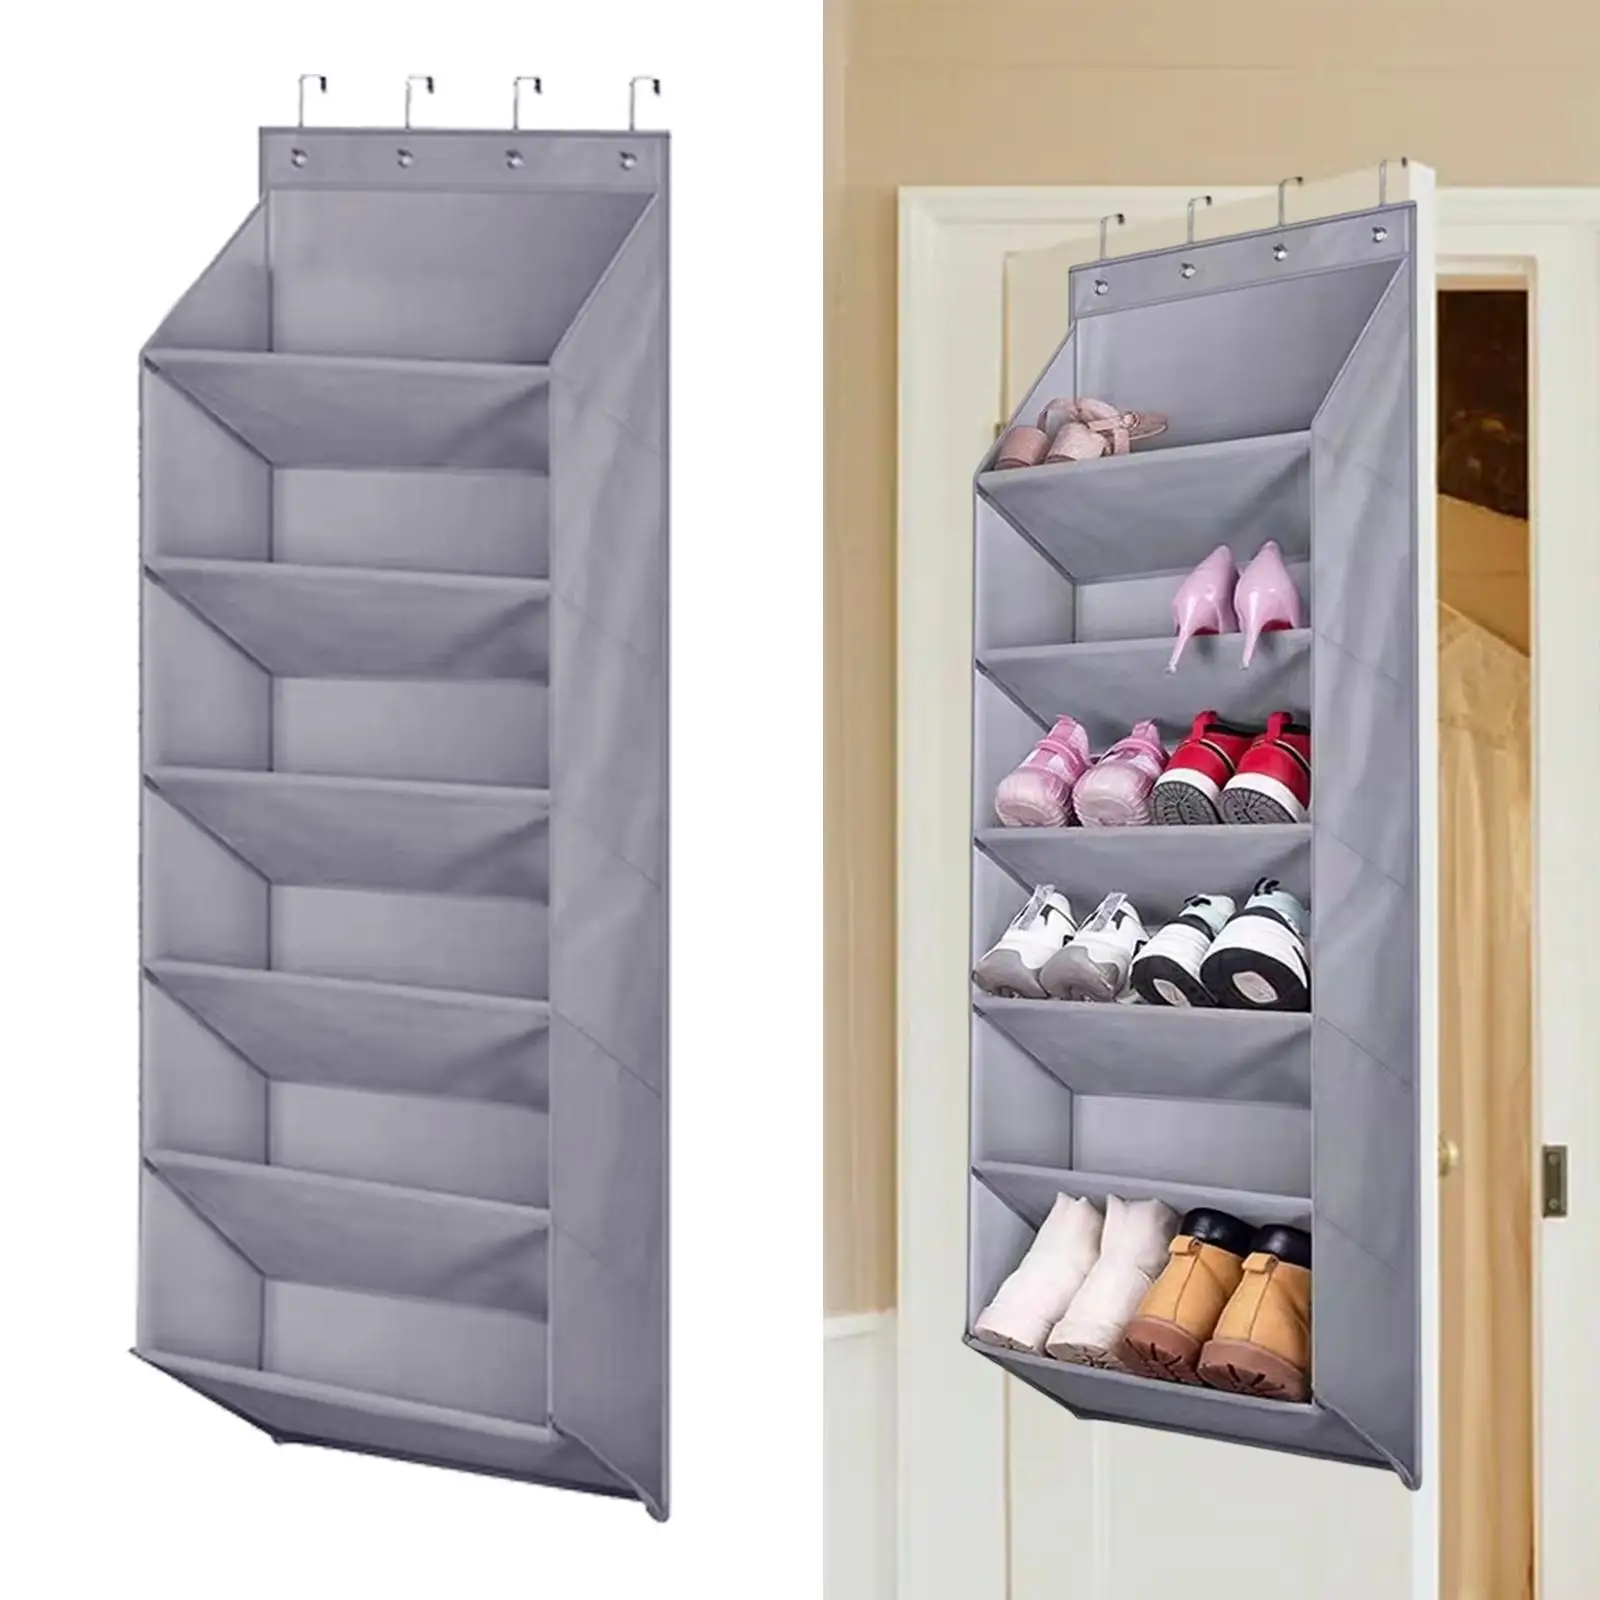 Door Shoe Rack Gray Multifunctional Oxford Cloth Various Compartments Foldable Hanging Storage Bag for Baby Items 14 Pair Boots